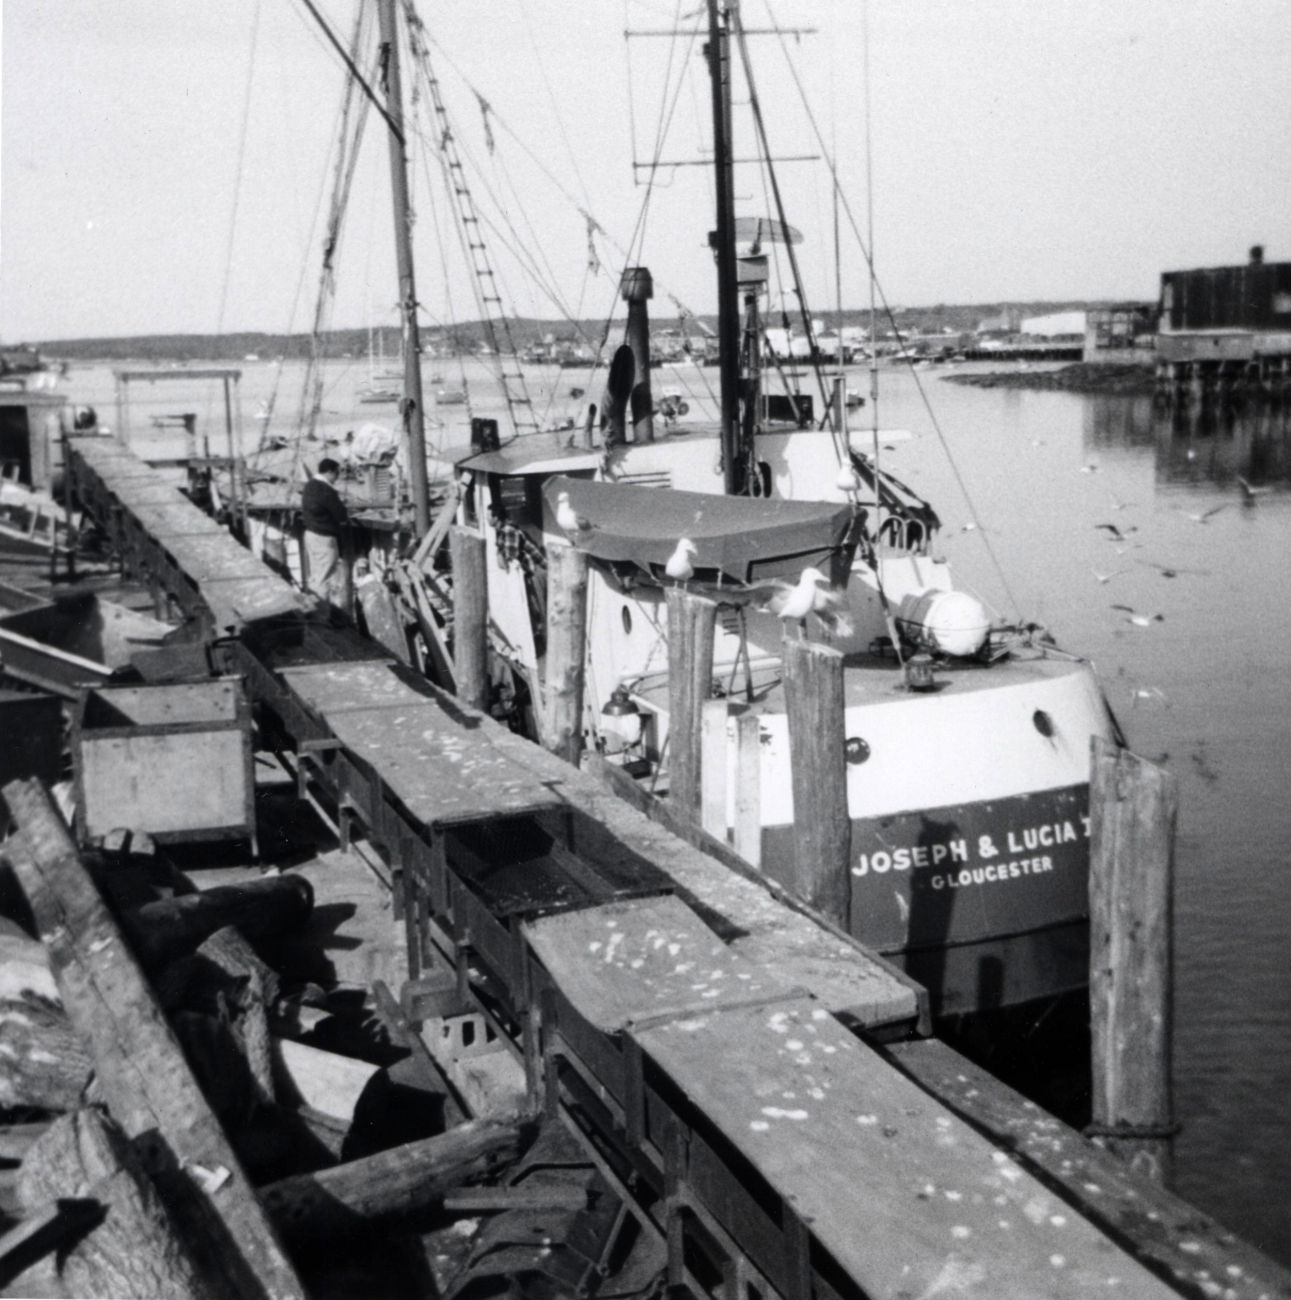 The vessel JOSEPH & LUCIA II out of Gloucester was used for catchingwhiting at the time of this photo